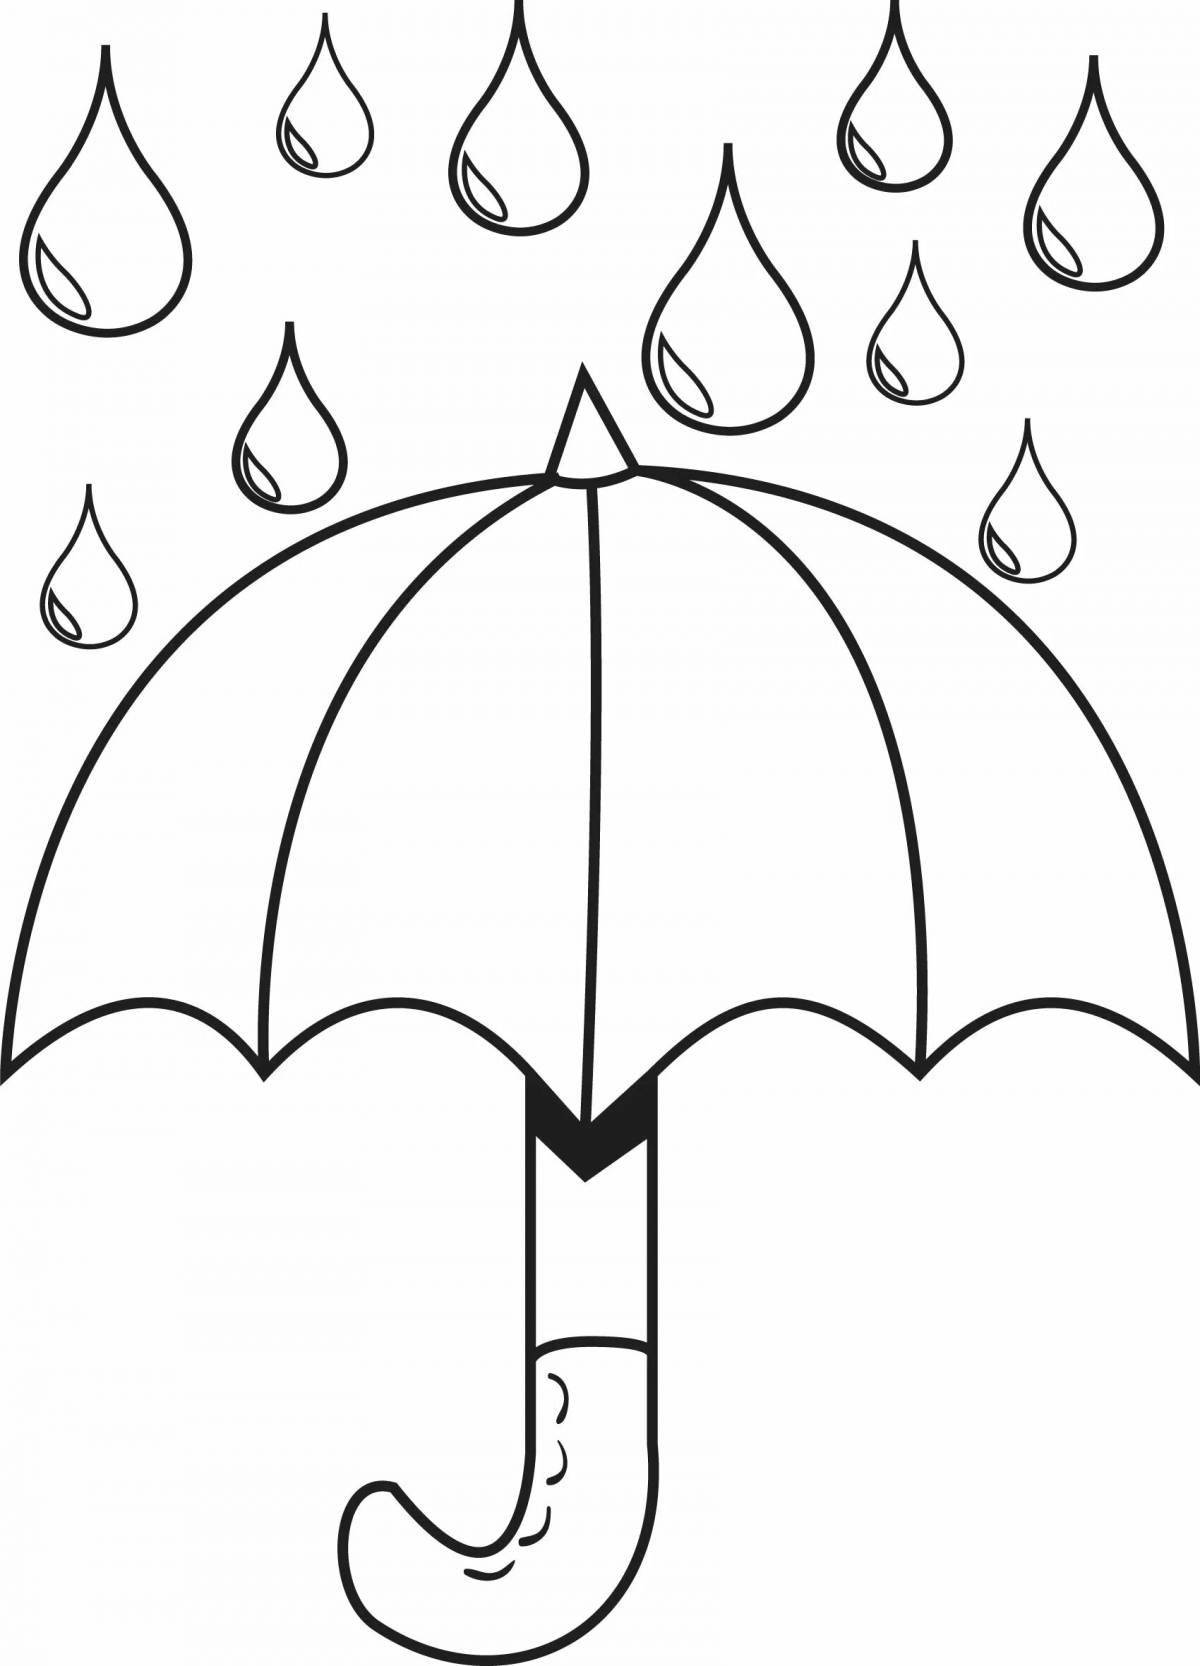 Coloring book funny umbrella for children 3-4 years old